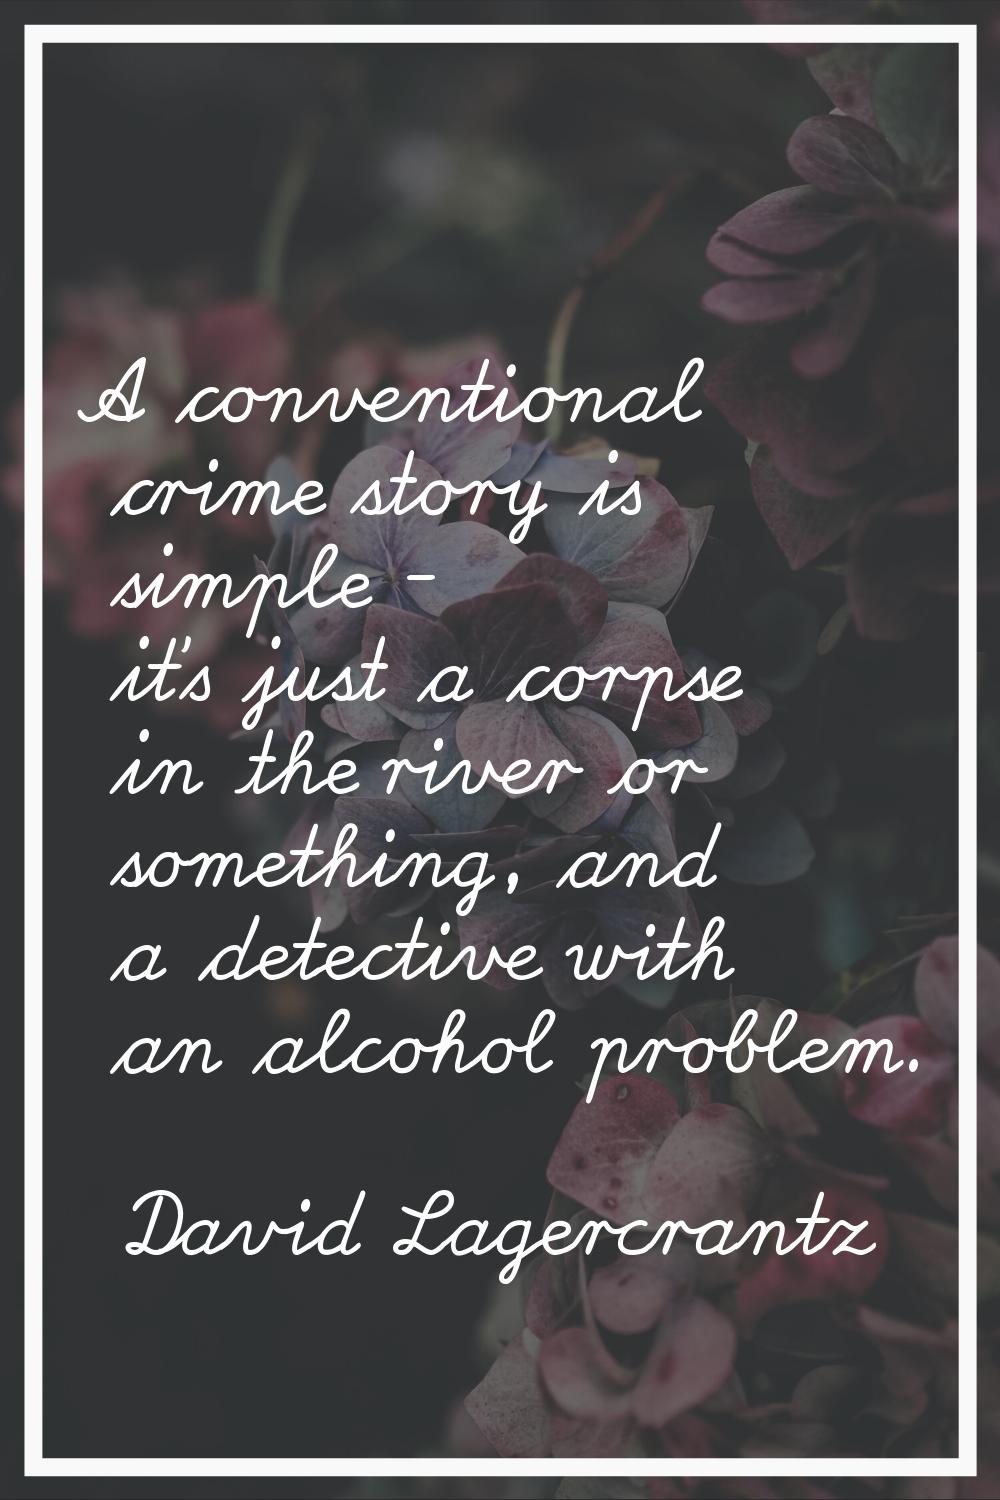 A conventional crime story is simple - it's just a corpse in the river or something, and a detectiv